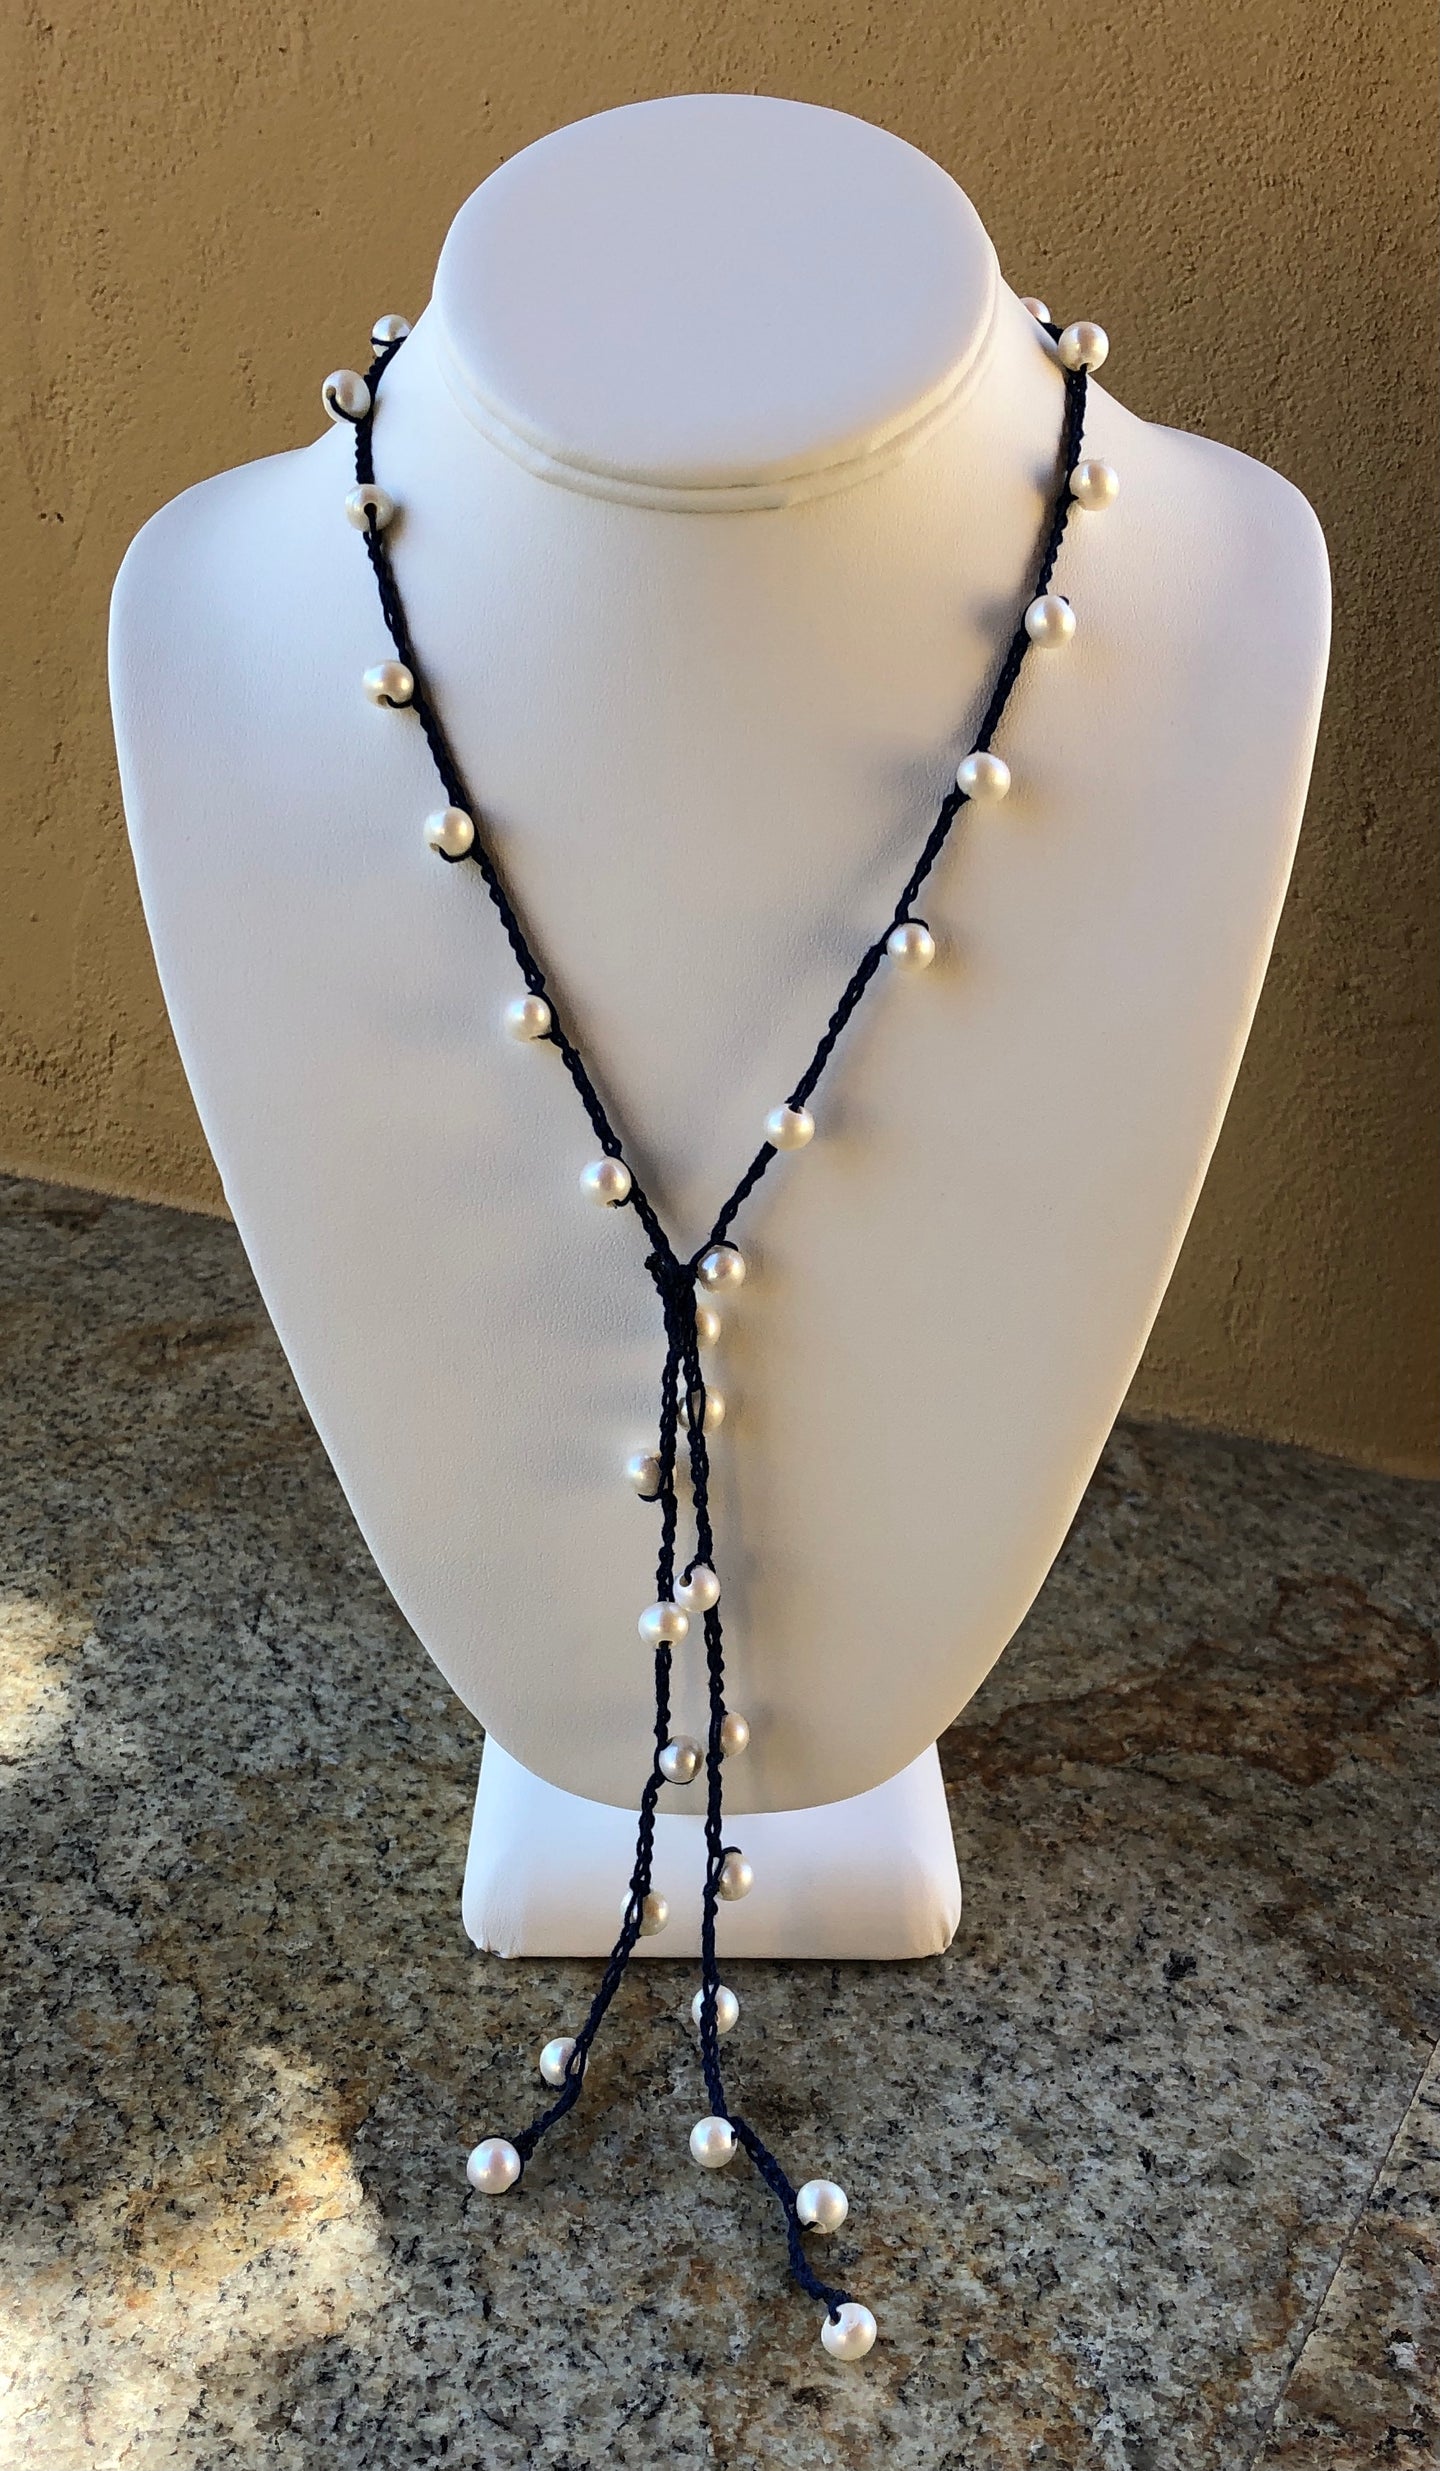 Necklace - Navy crocheted tassel necklace with white pearls